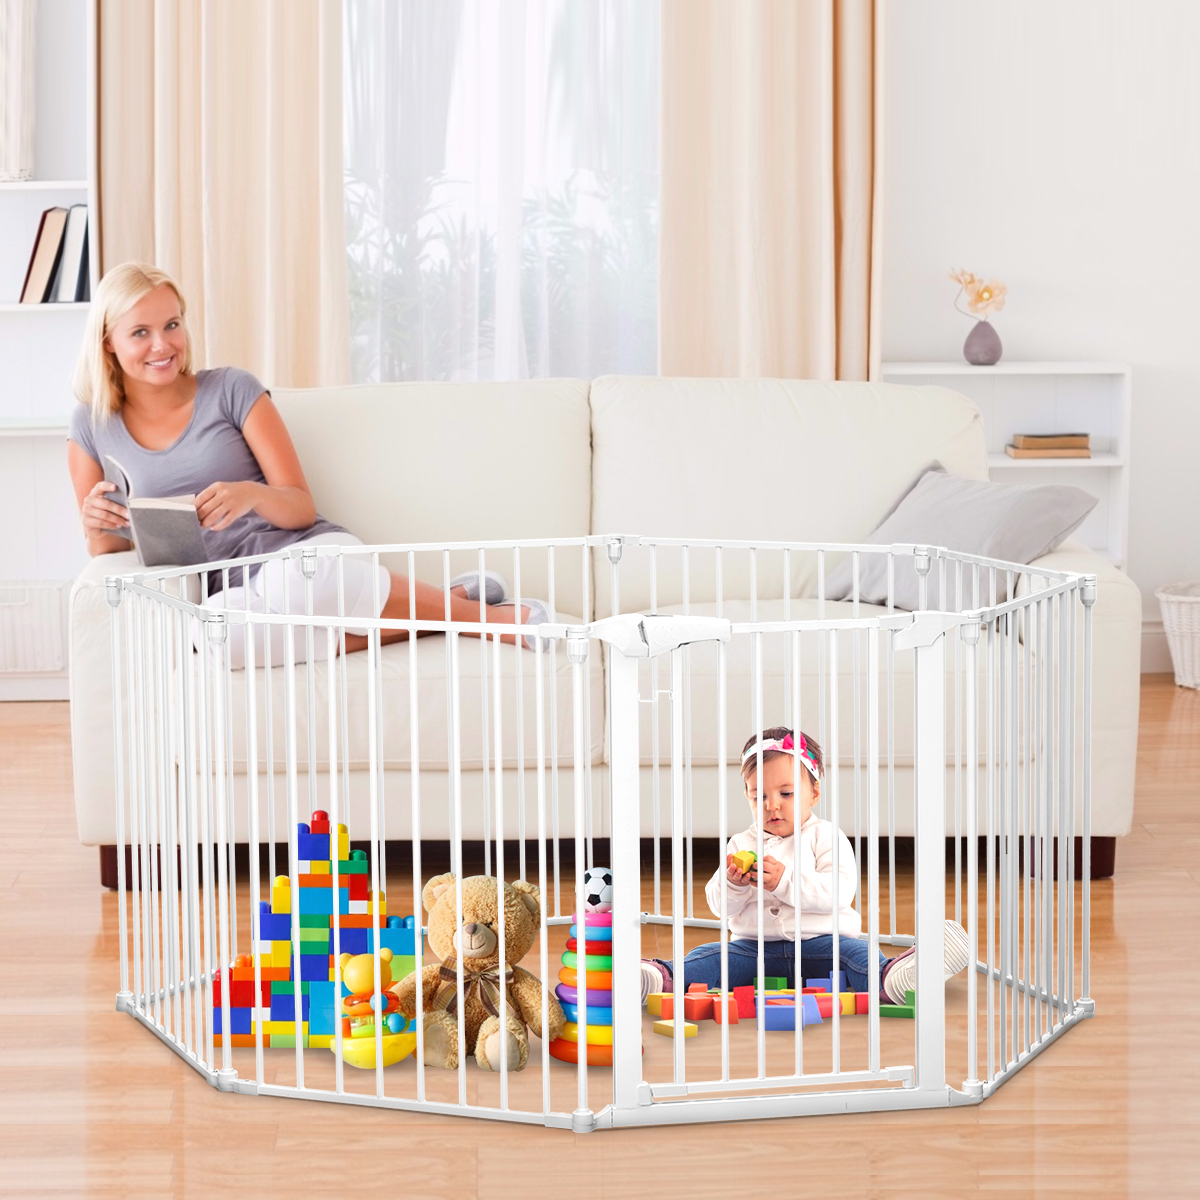 Comomy-198-inch-Long-Baby-Gate-Extra-Wide-Baby-Gate-Play-Yard-8-Panel-Foldable-Safety-Gate-for-Pet-C-1933282-2